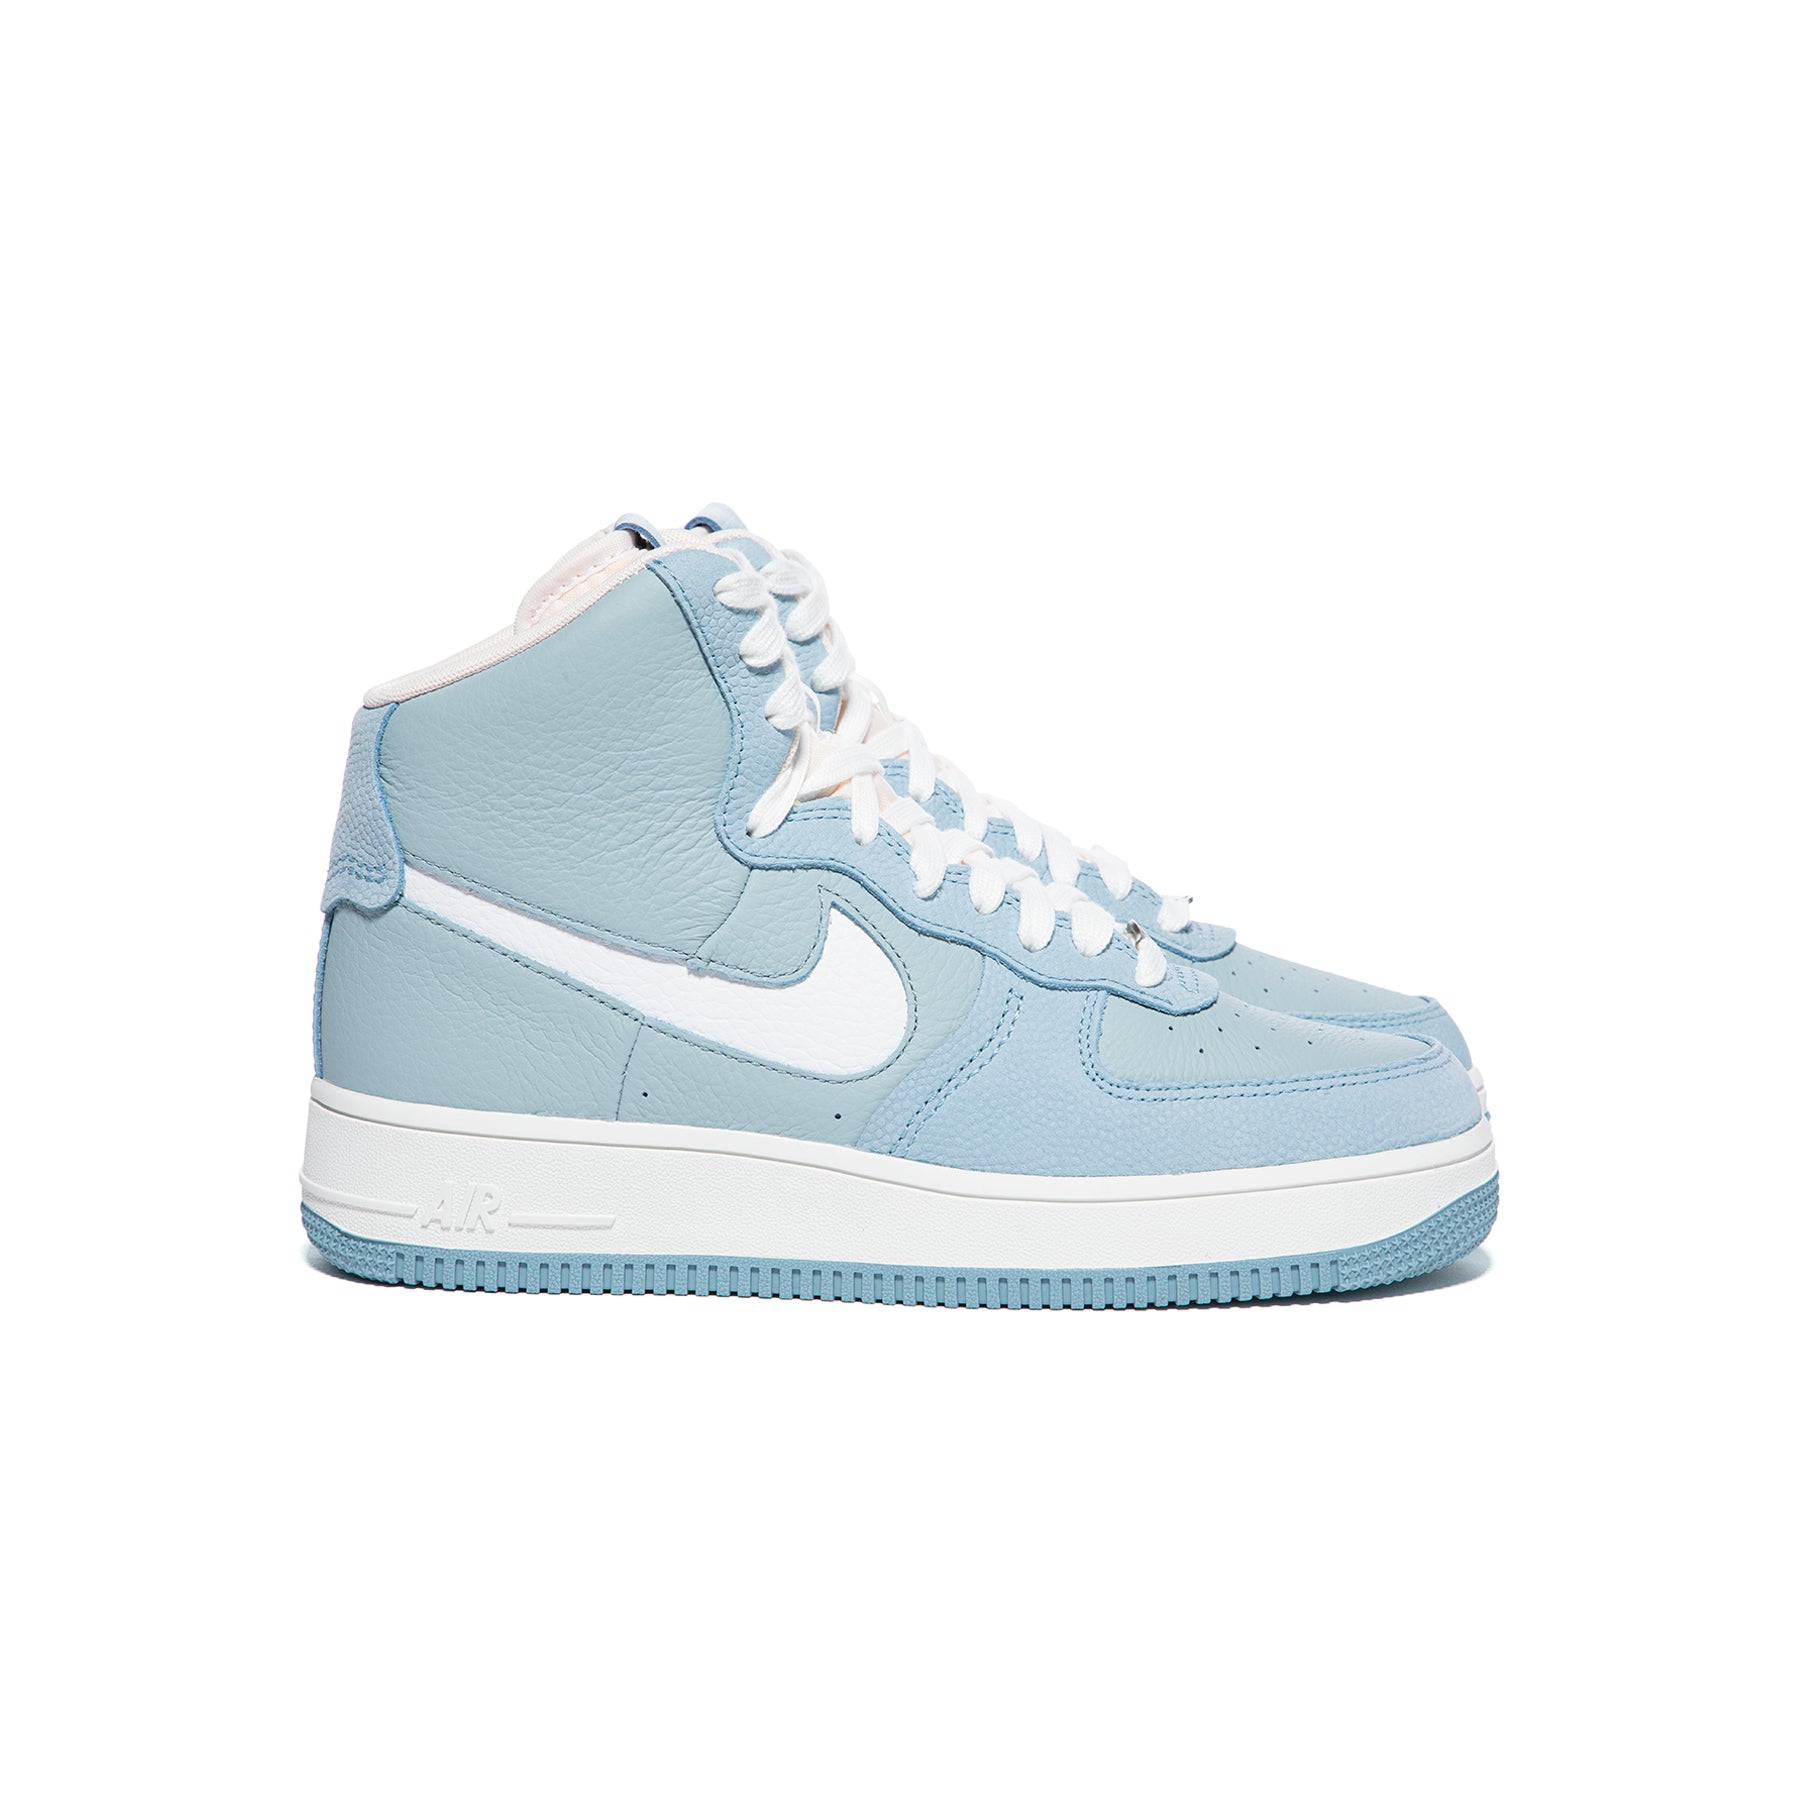 AIR FORCE 1 CRATER Nike off White wz box.unisex.womens size 11